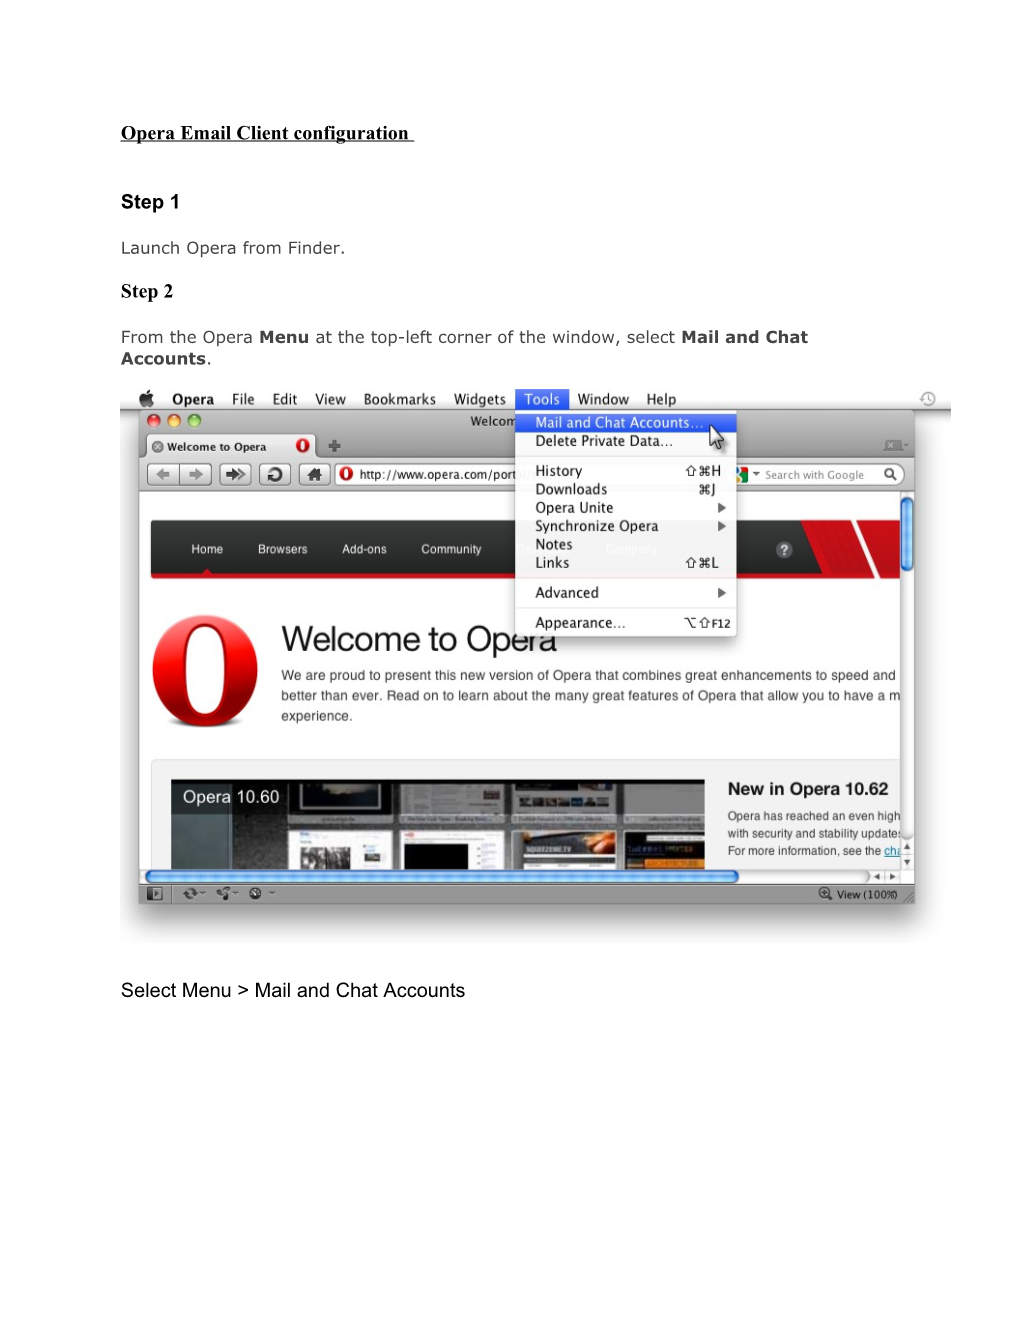 Opera Email Client Configuration